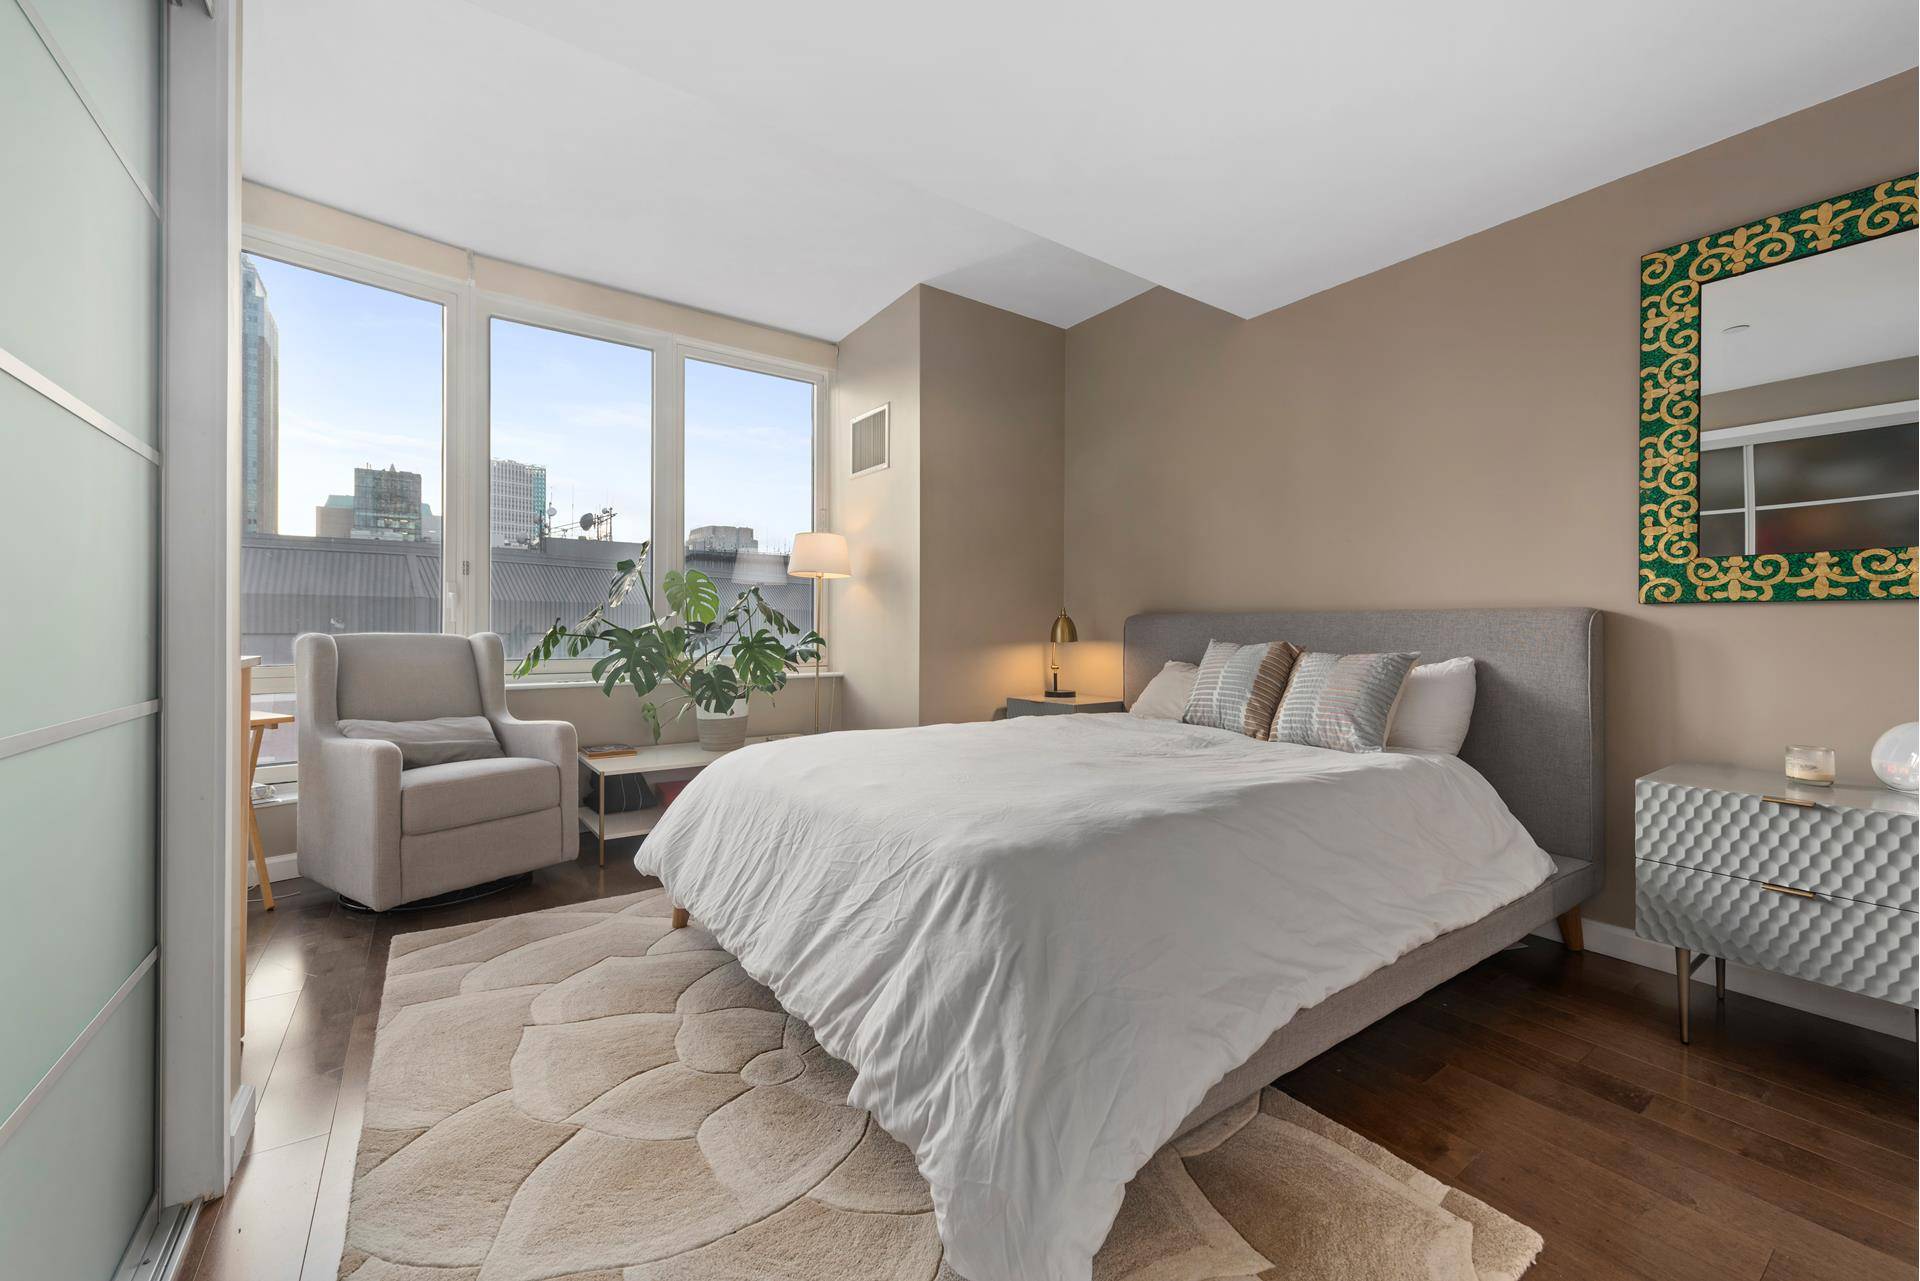 Completely renovated and reconfigured, this rarely available G Line unit at The Oro boasts truly grand living.